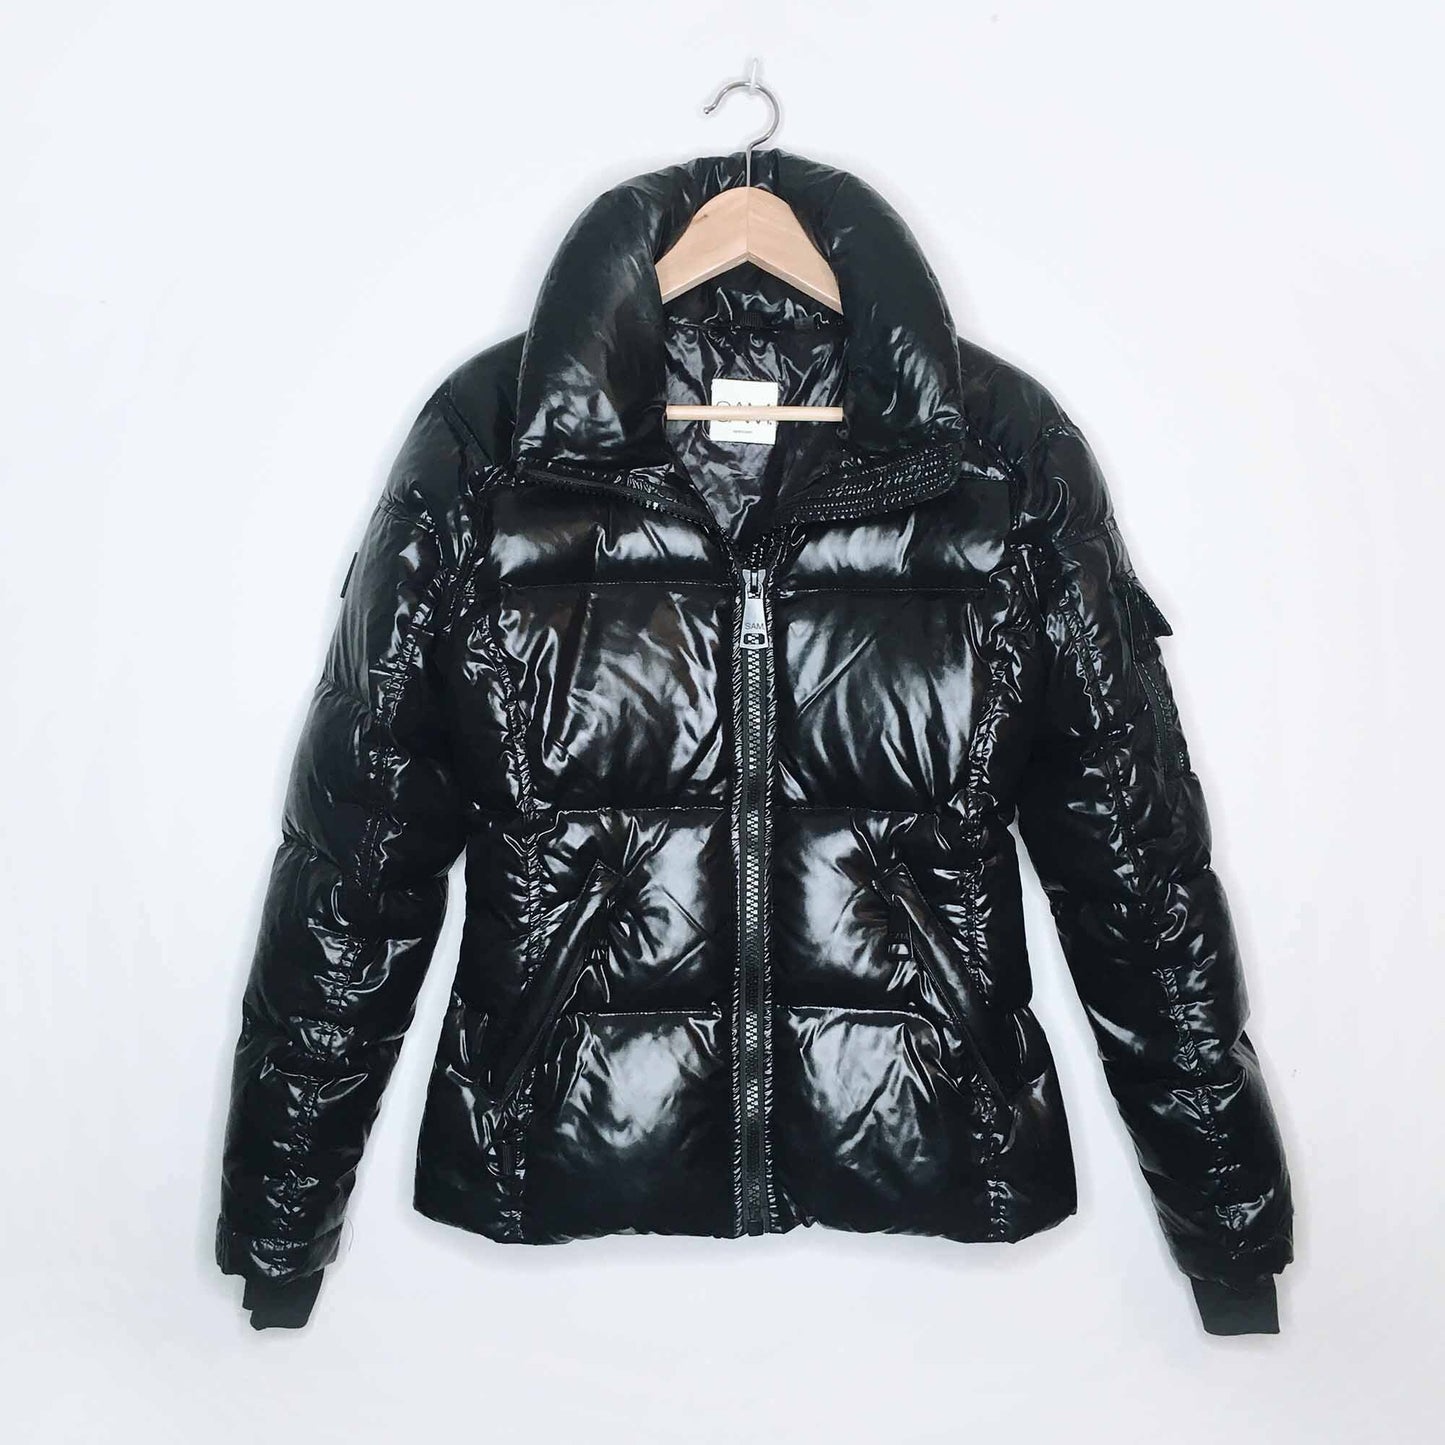 SAM. black freestyle down puffer jacket - size Small